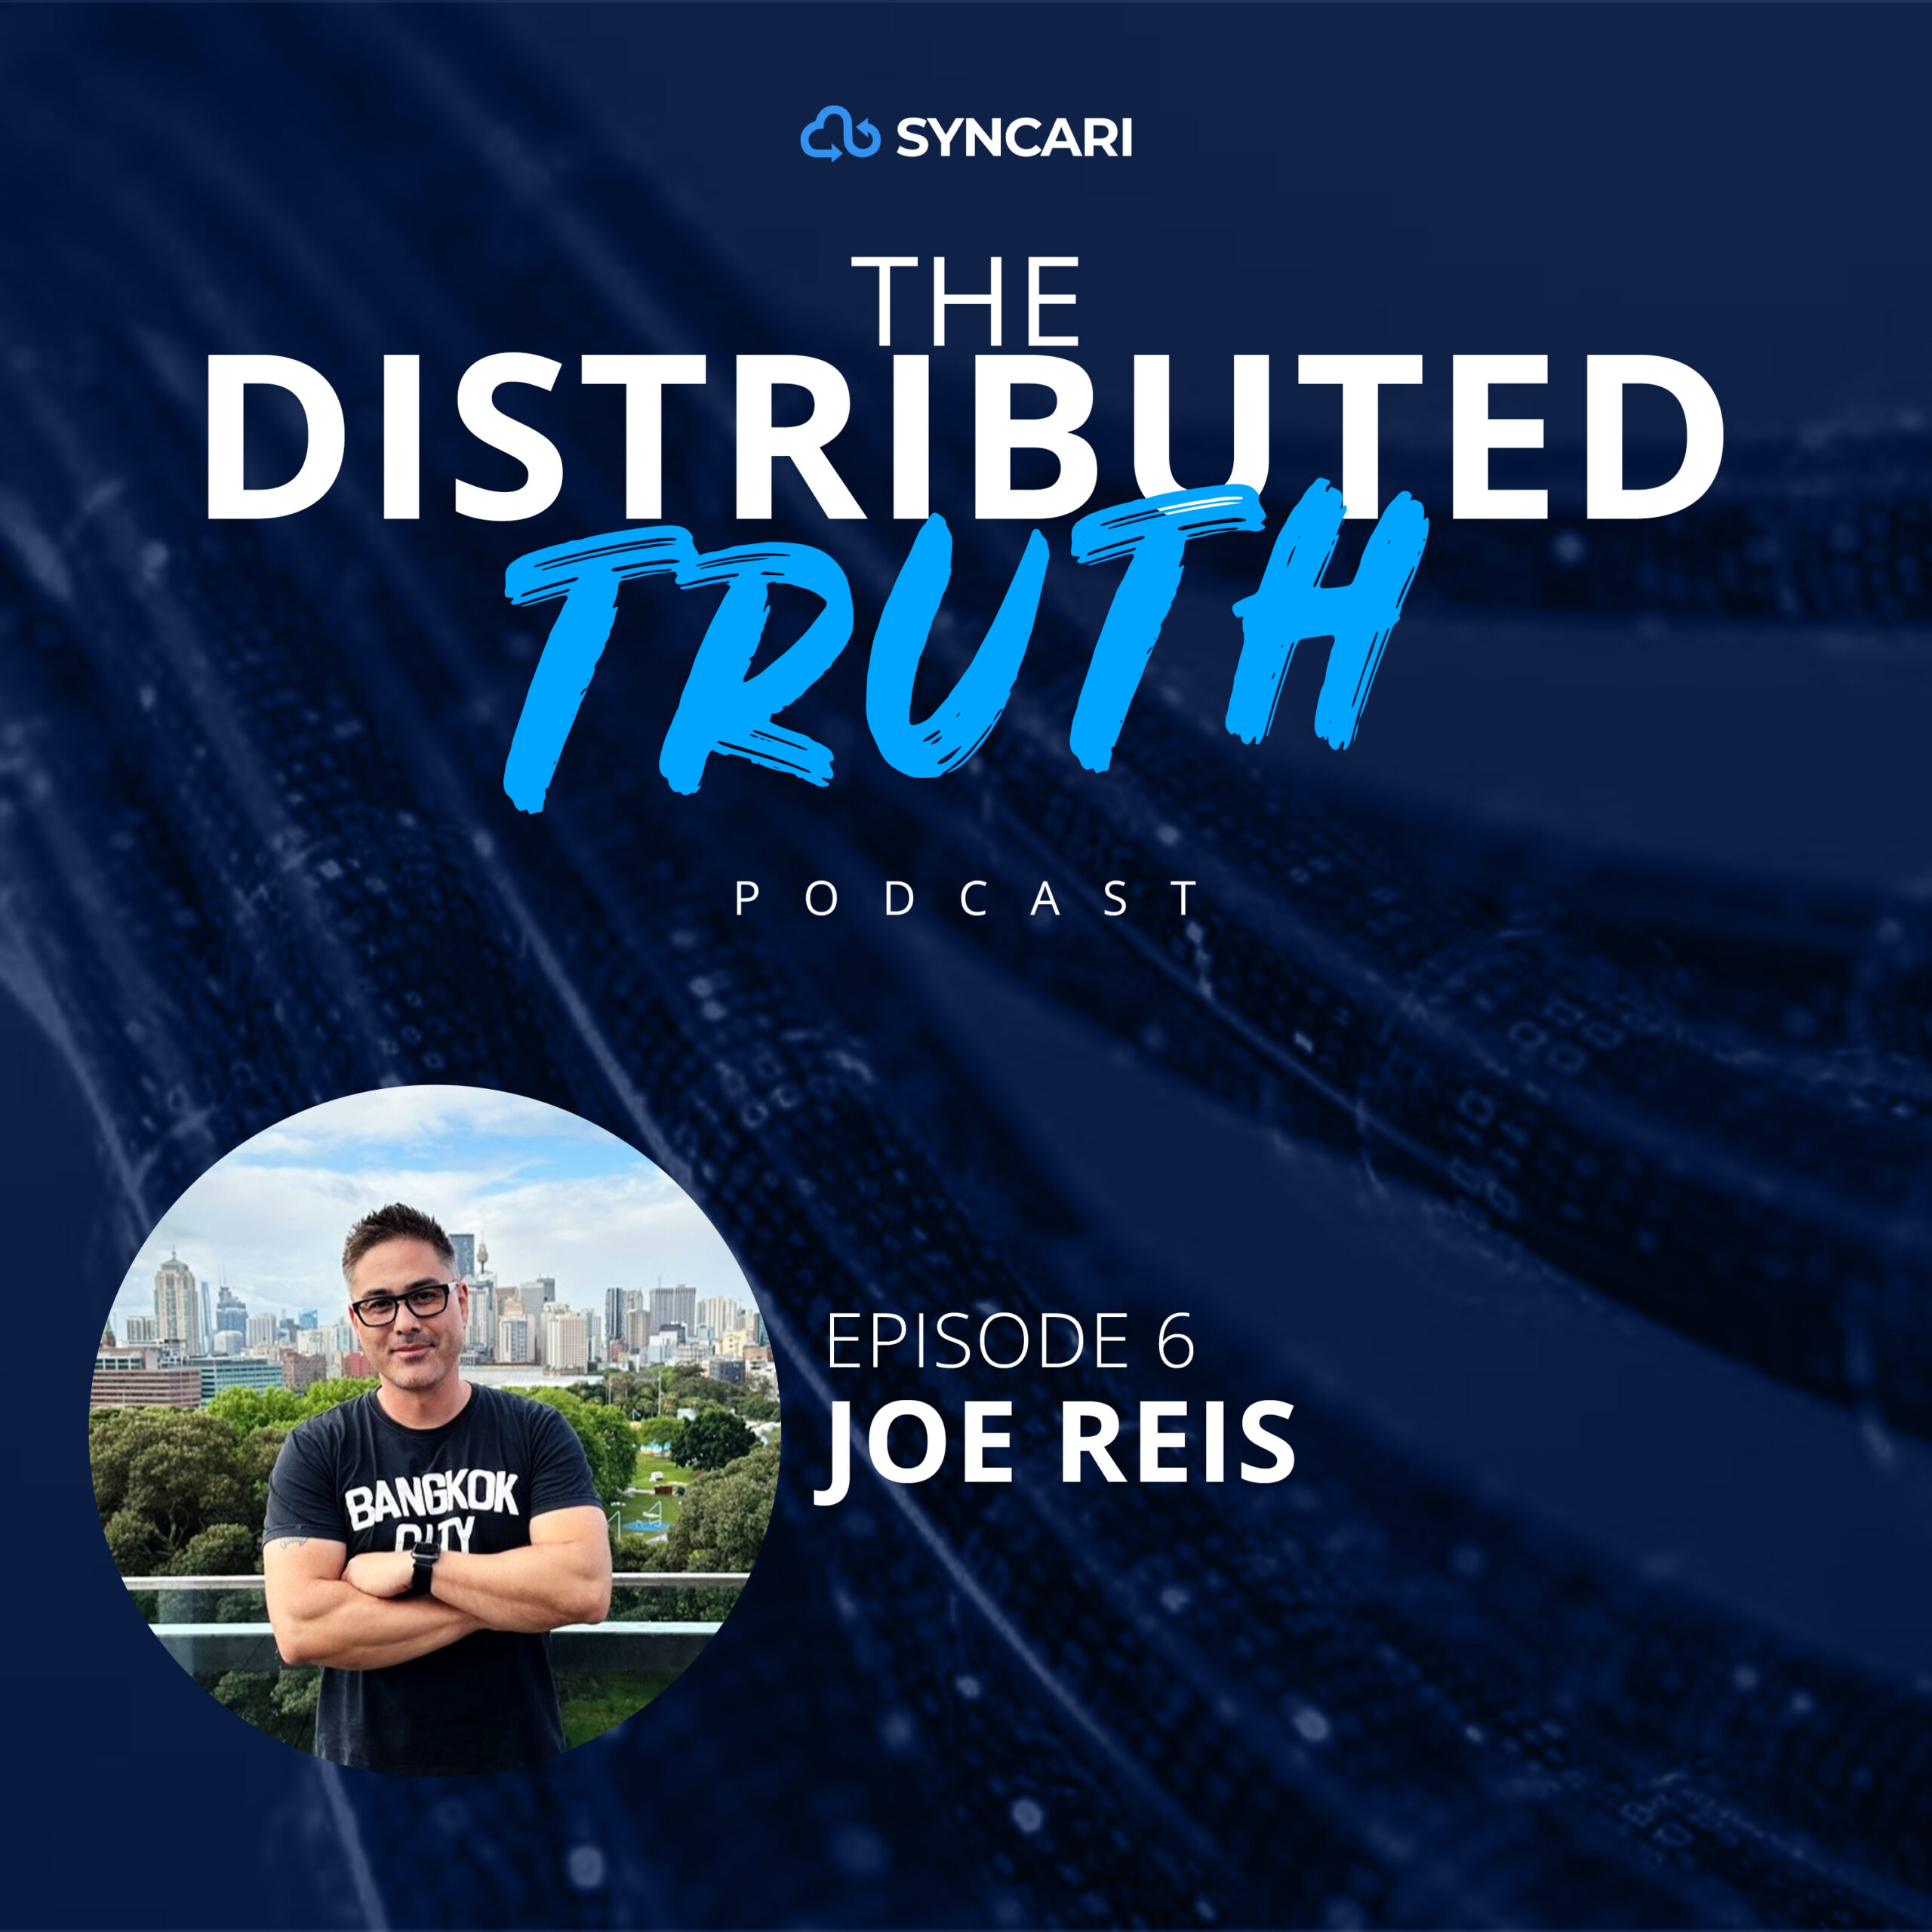 Episode 6 of The Distributed Truth with Joe Reis